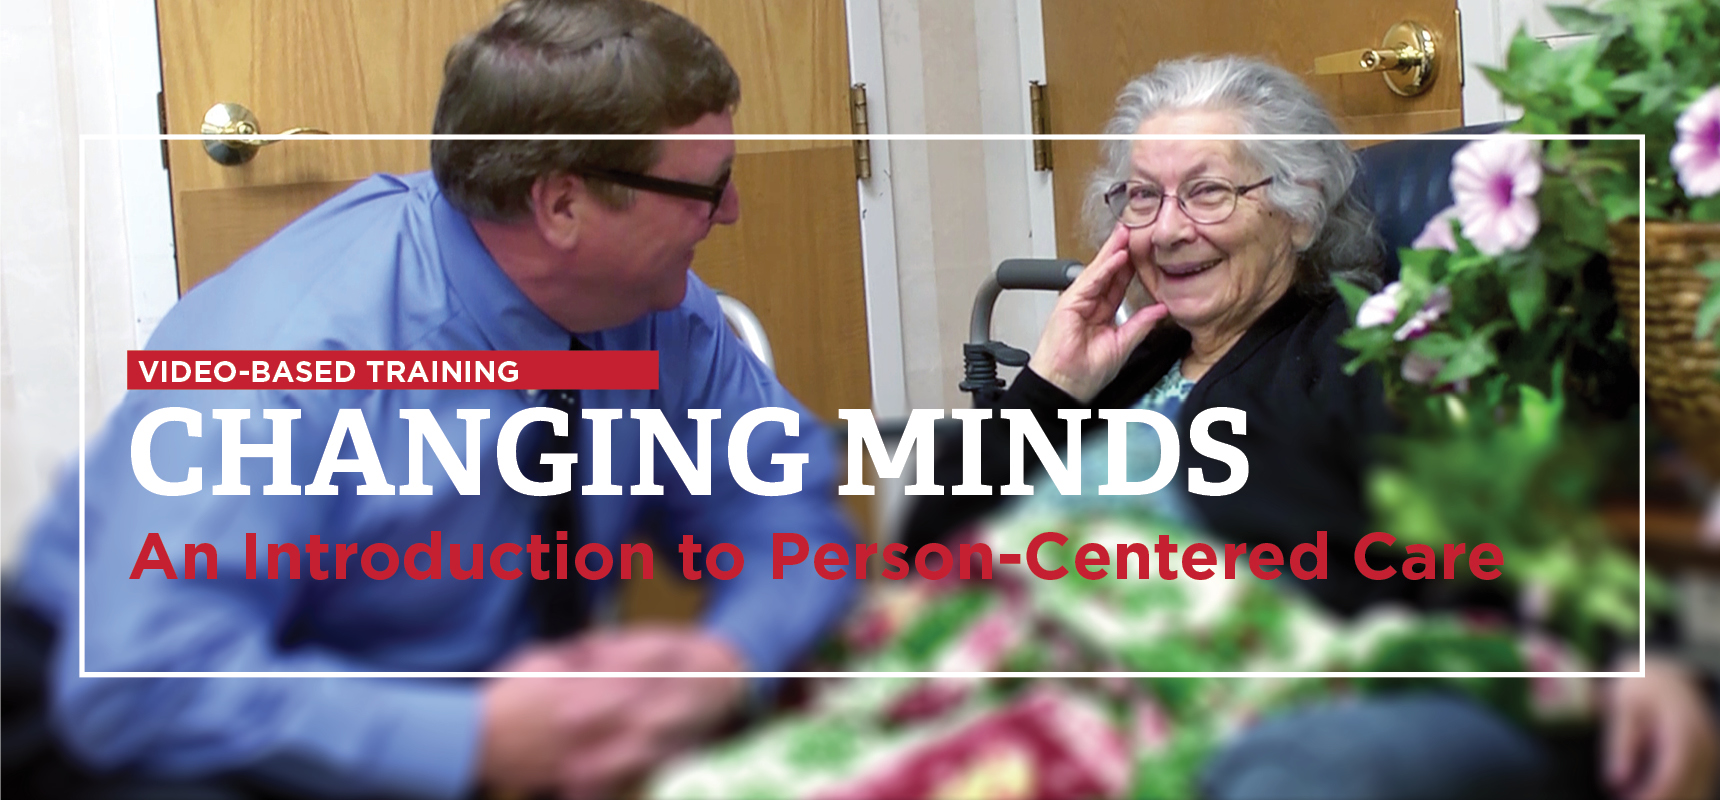 Changing Minds, an introduction to person-centered care